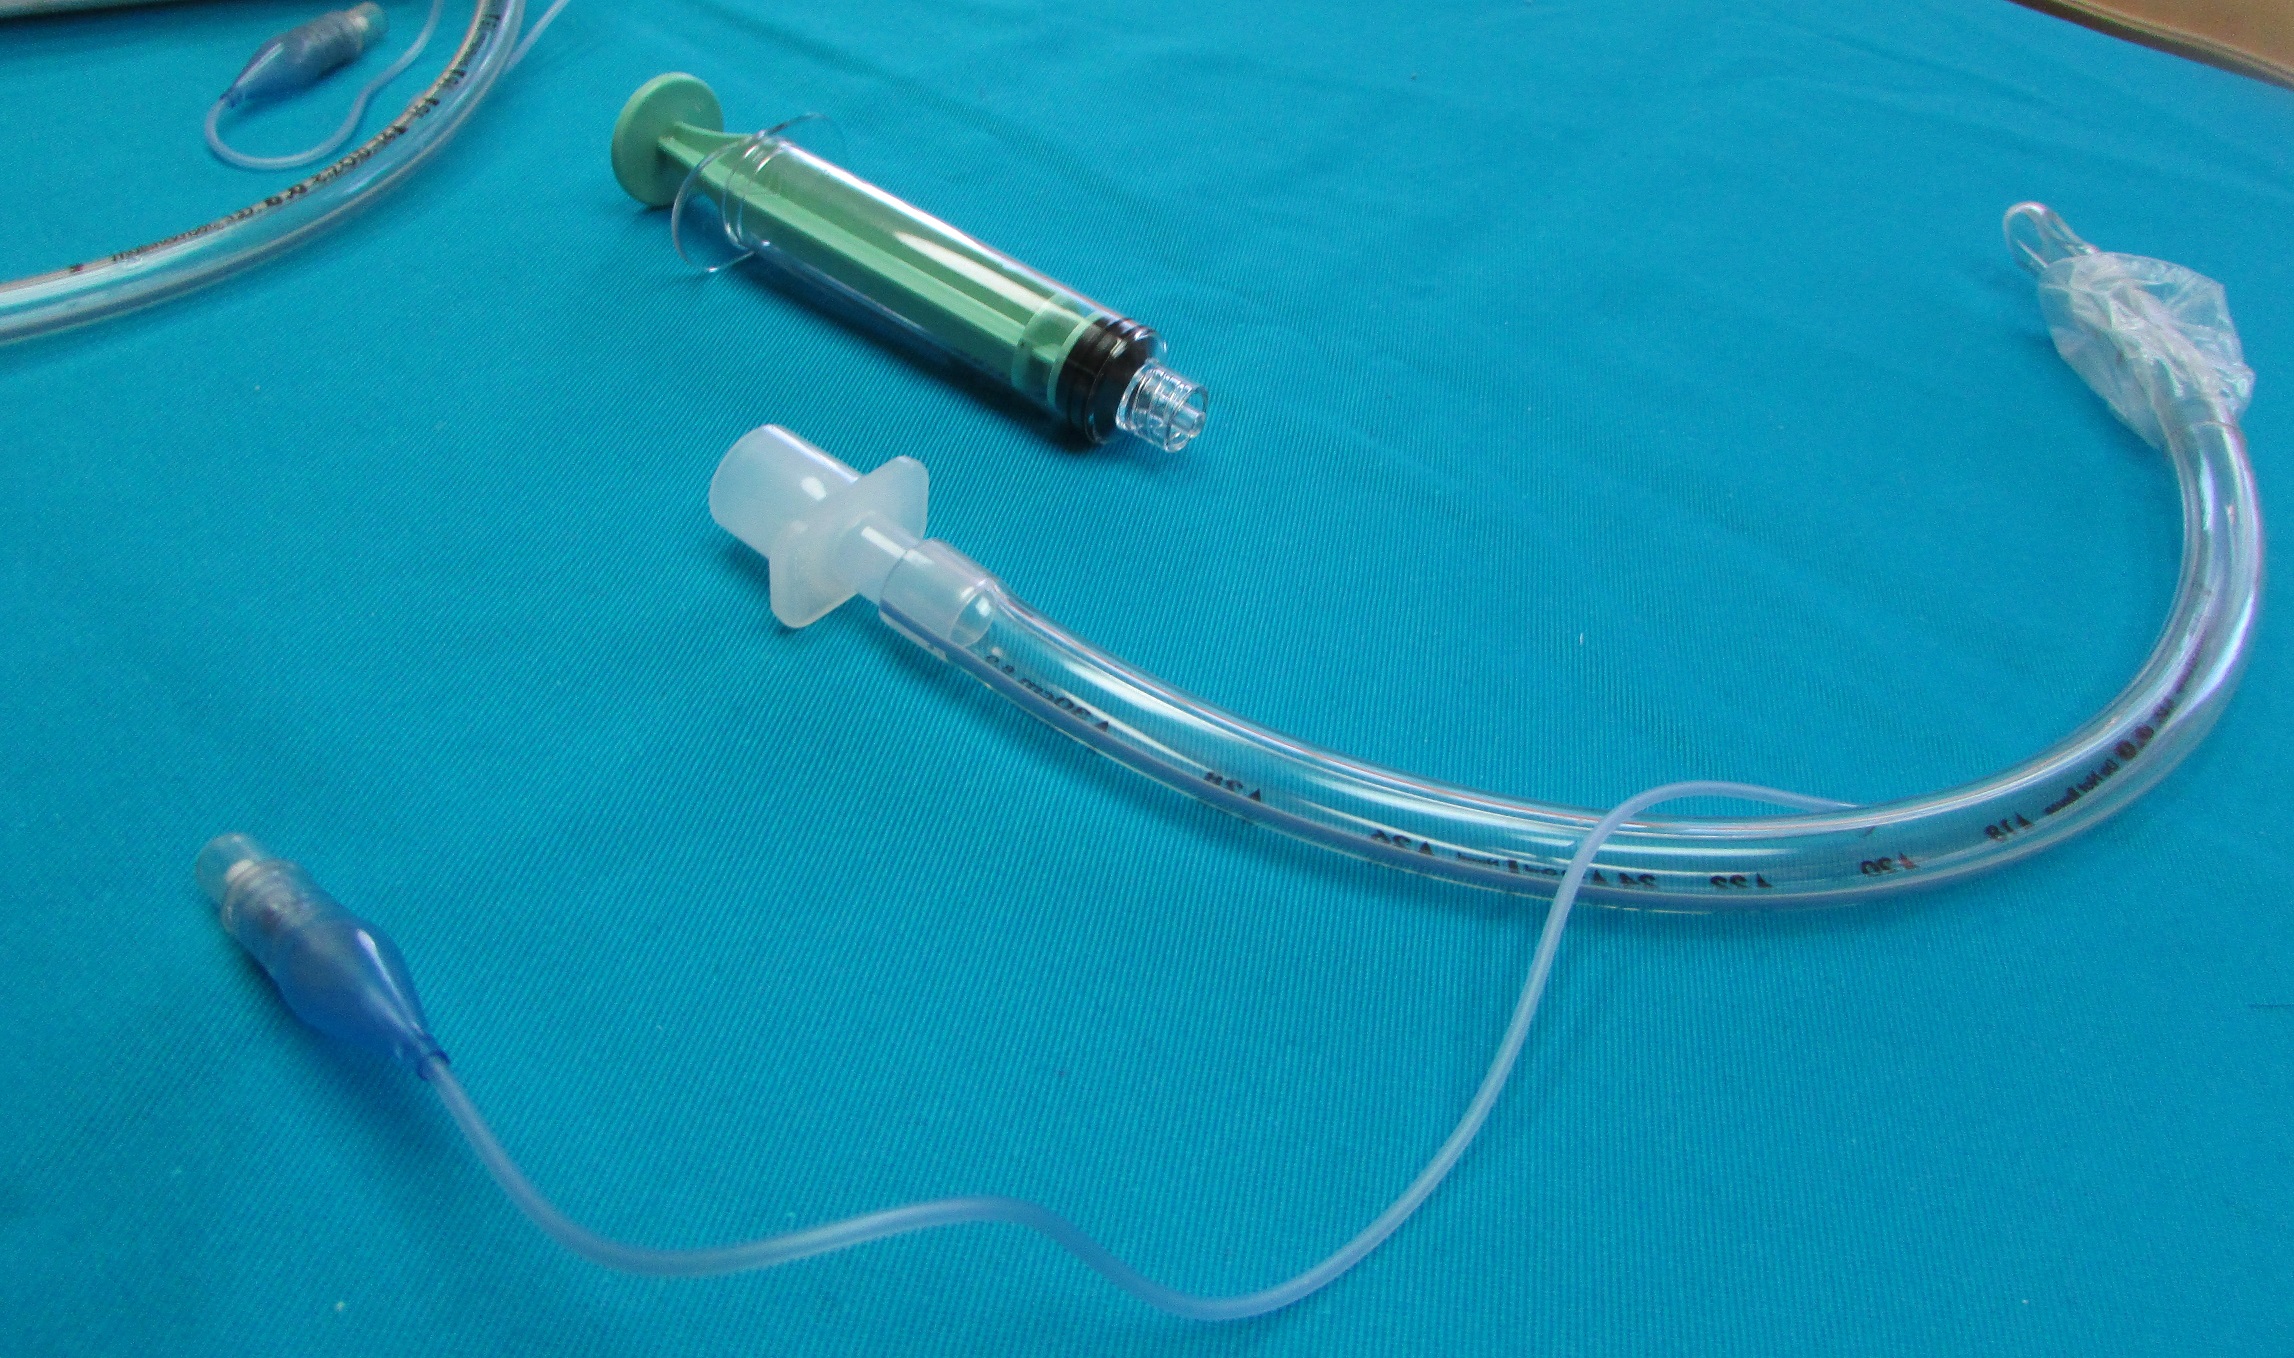 An endotracheal tube with syring for inflation on bedding